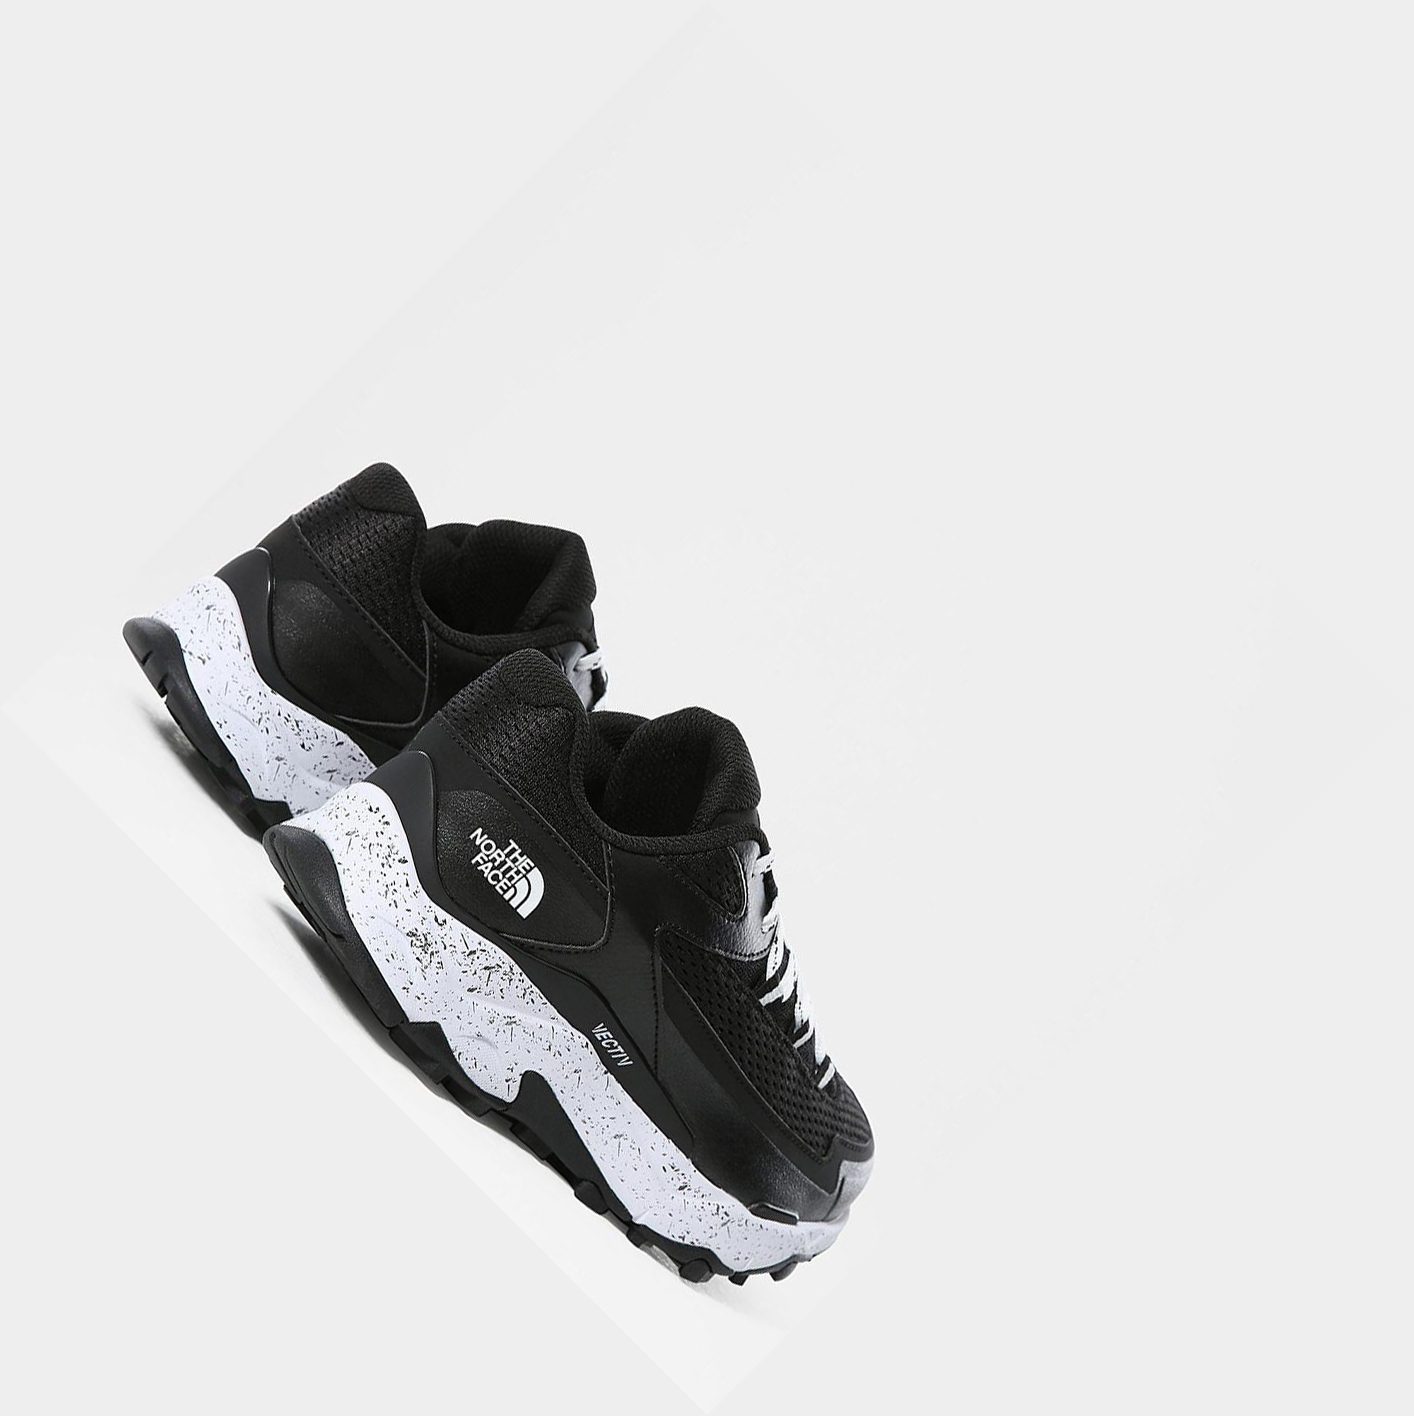 Women's The North Face VECTIV TARAVAL Walking Shoes Black White | US457JYFB